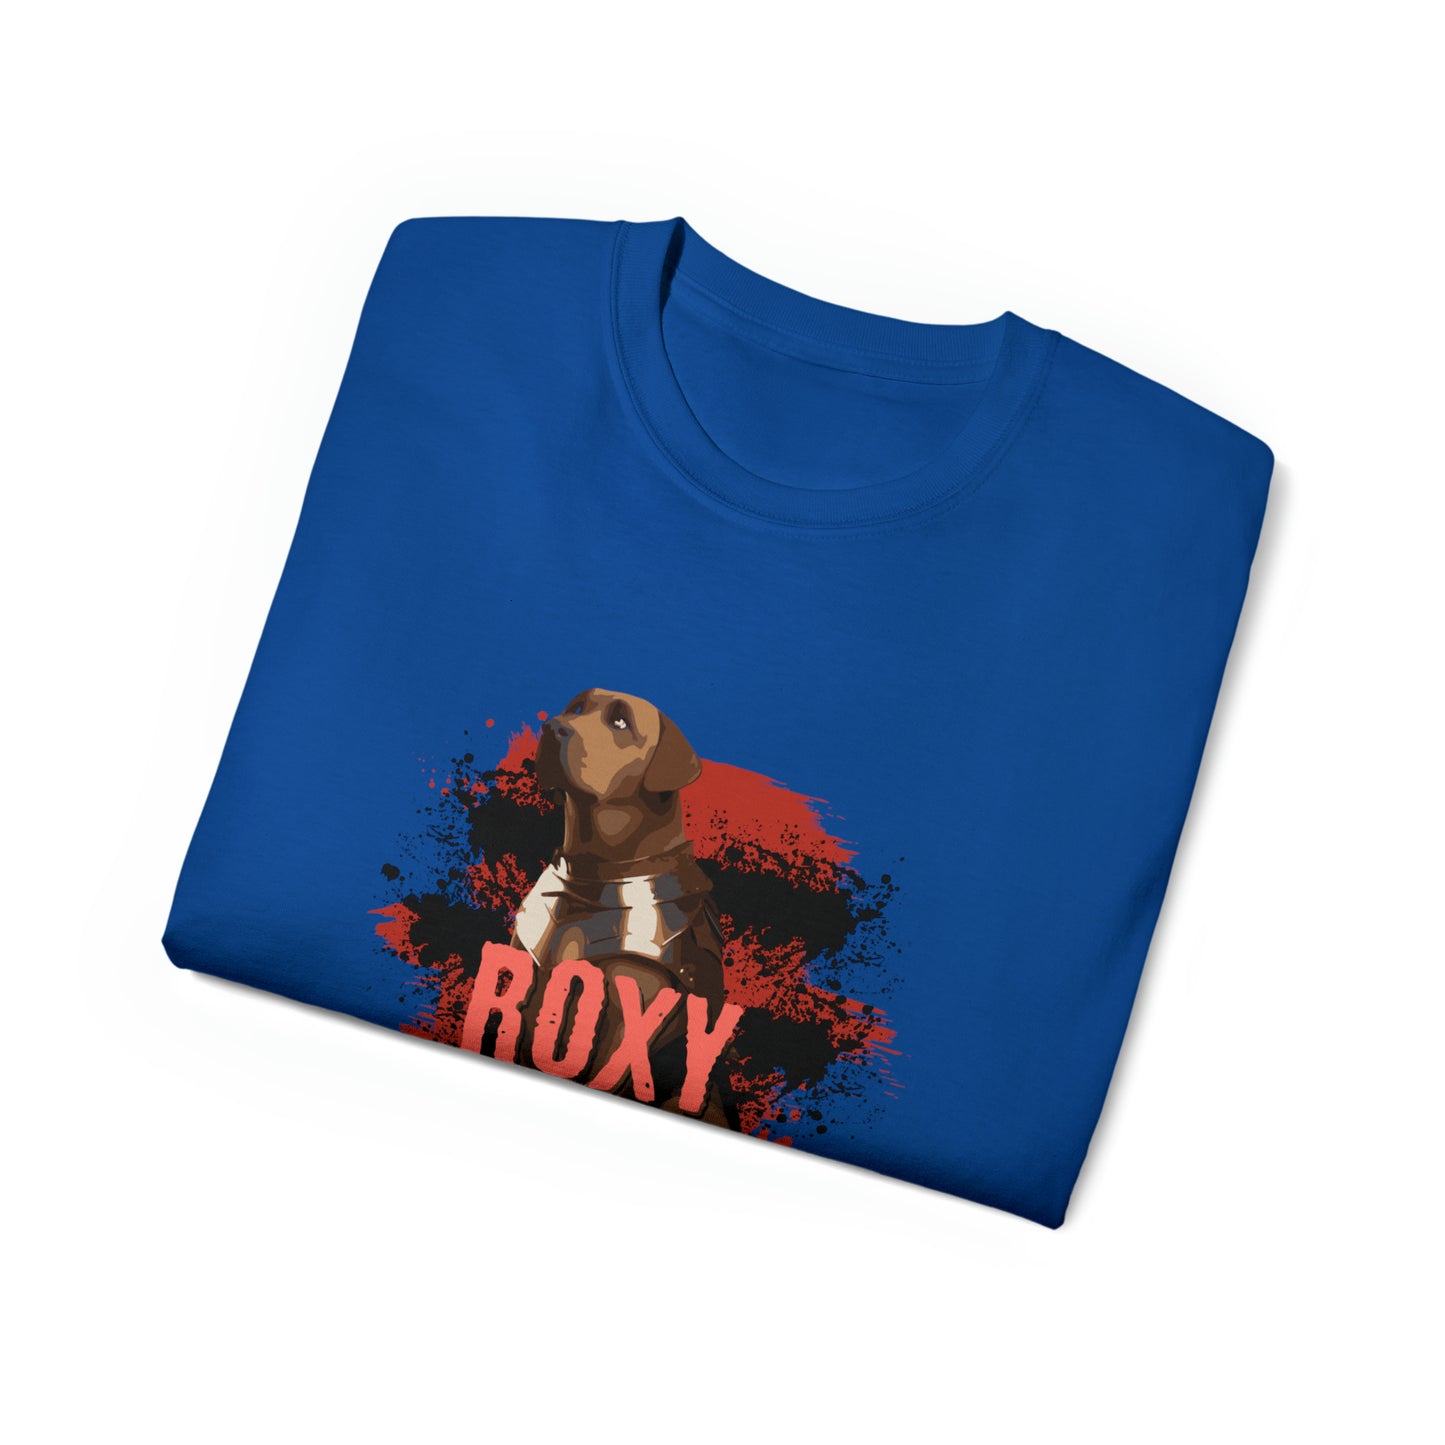 Roxy - Forever in Our Hearts - PawWord Charcter - Unisex Ultra Cotton Tee